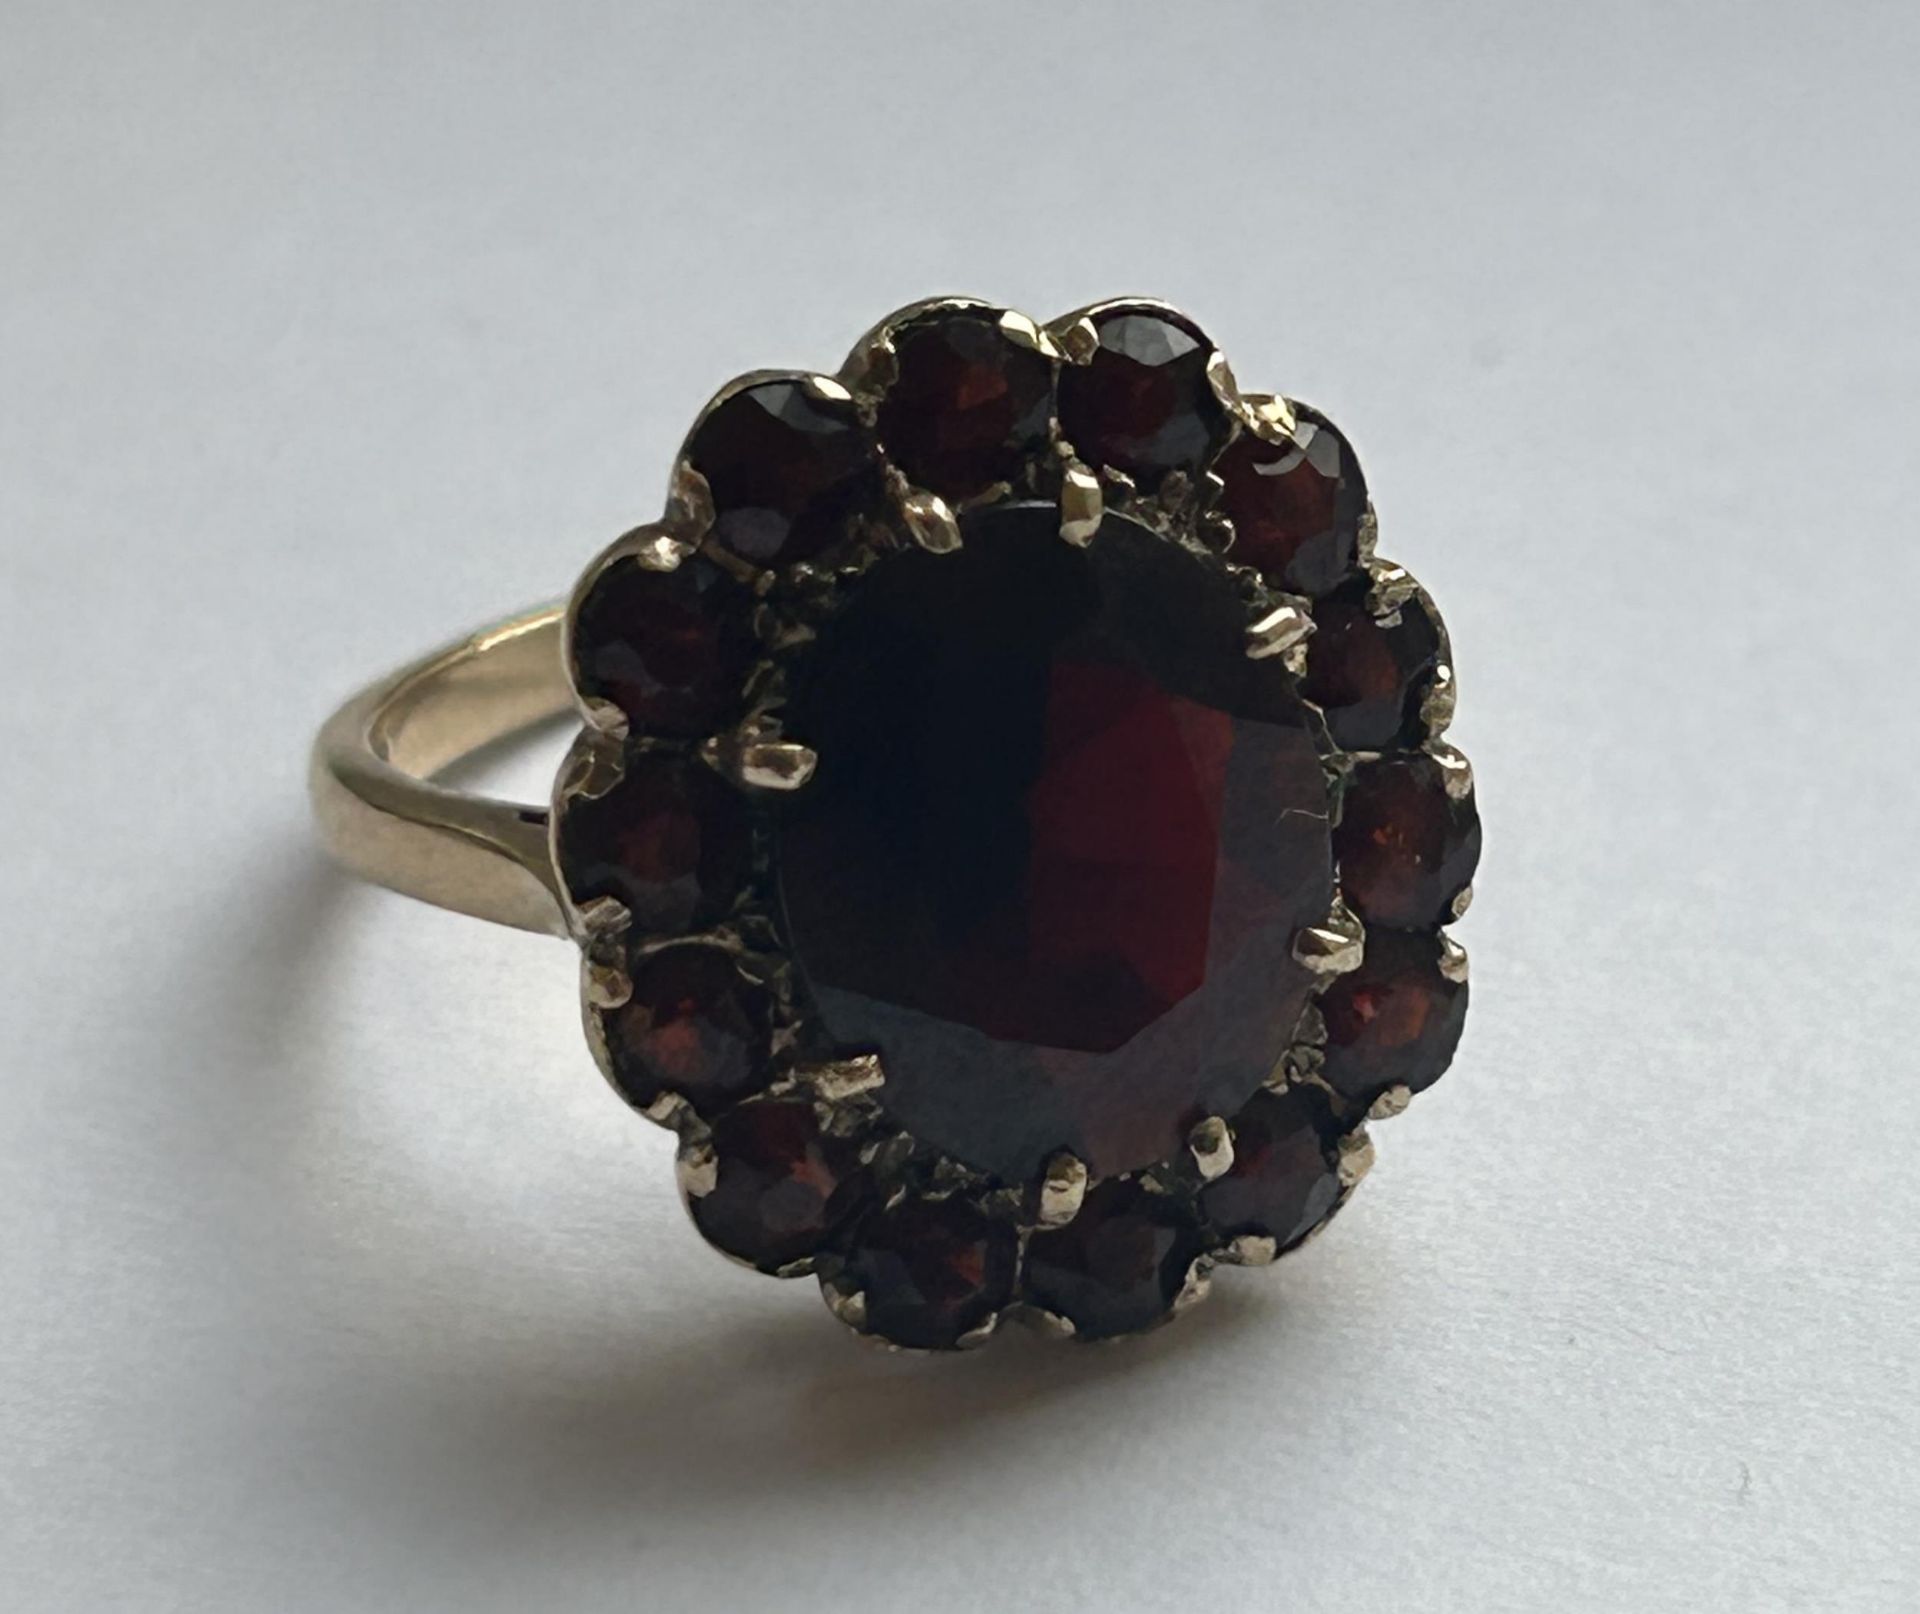 A 9CT YELLOW GOLD AND GARNET RING IN A FLOWER DESIGN SIZE P, WEIGHT 5.46 GRAMS